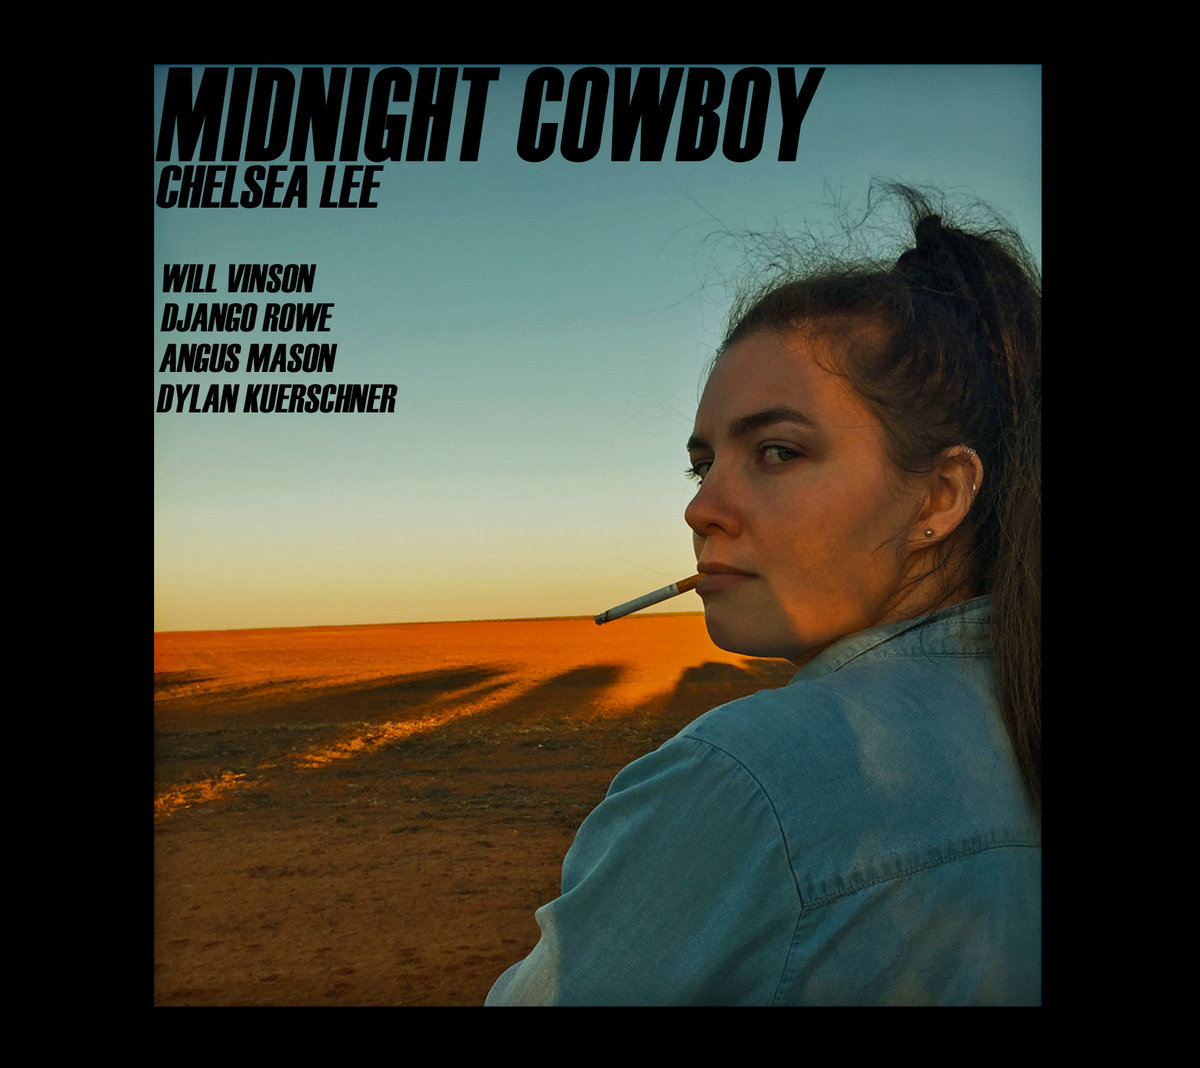 Chelsea Lee - "Midnight Cowboy" [Recorded & Mixed (JB), Mastered (JP)]